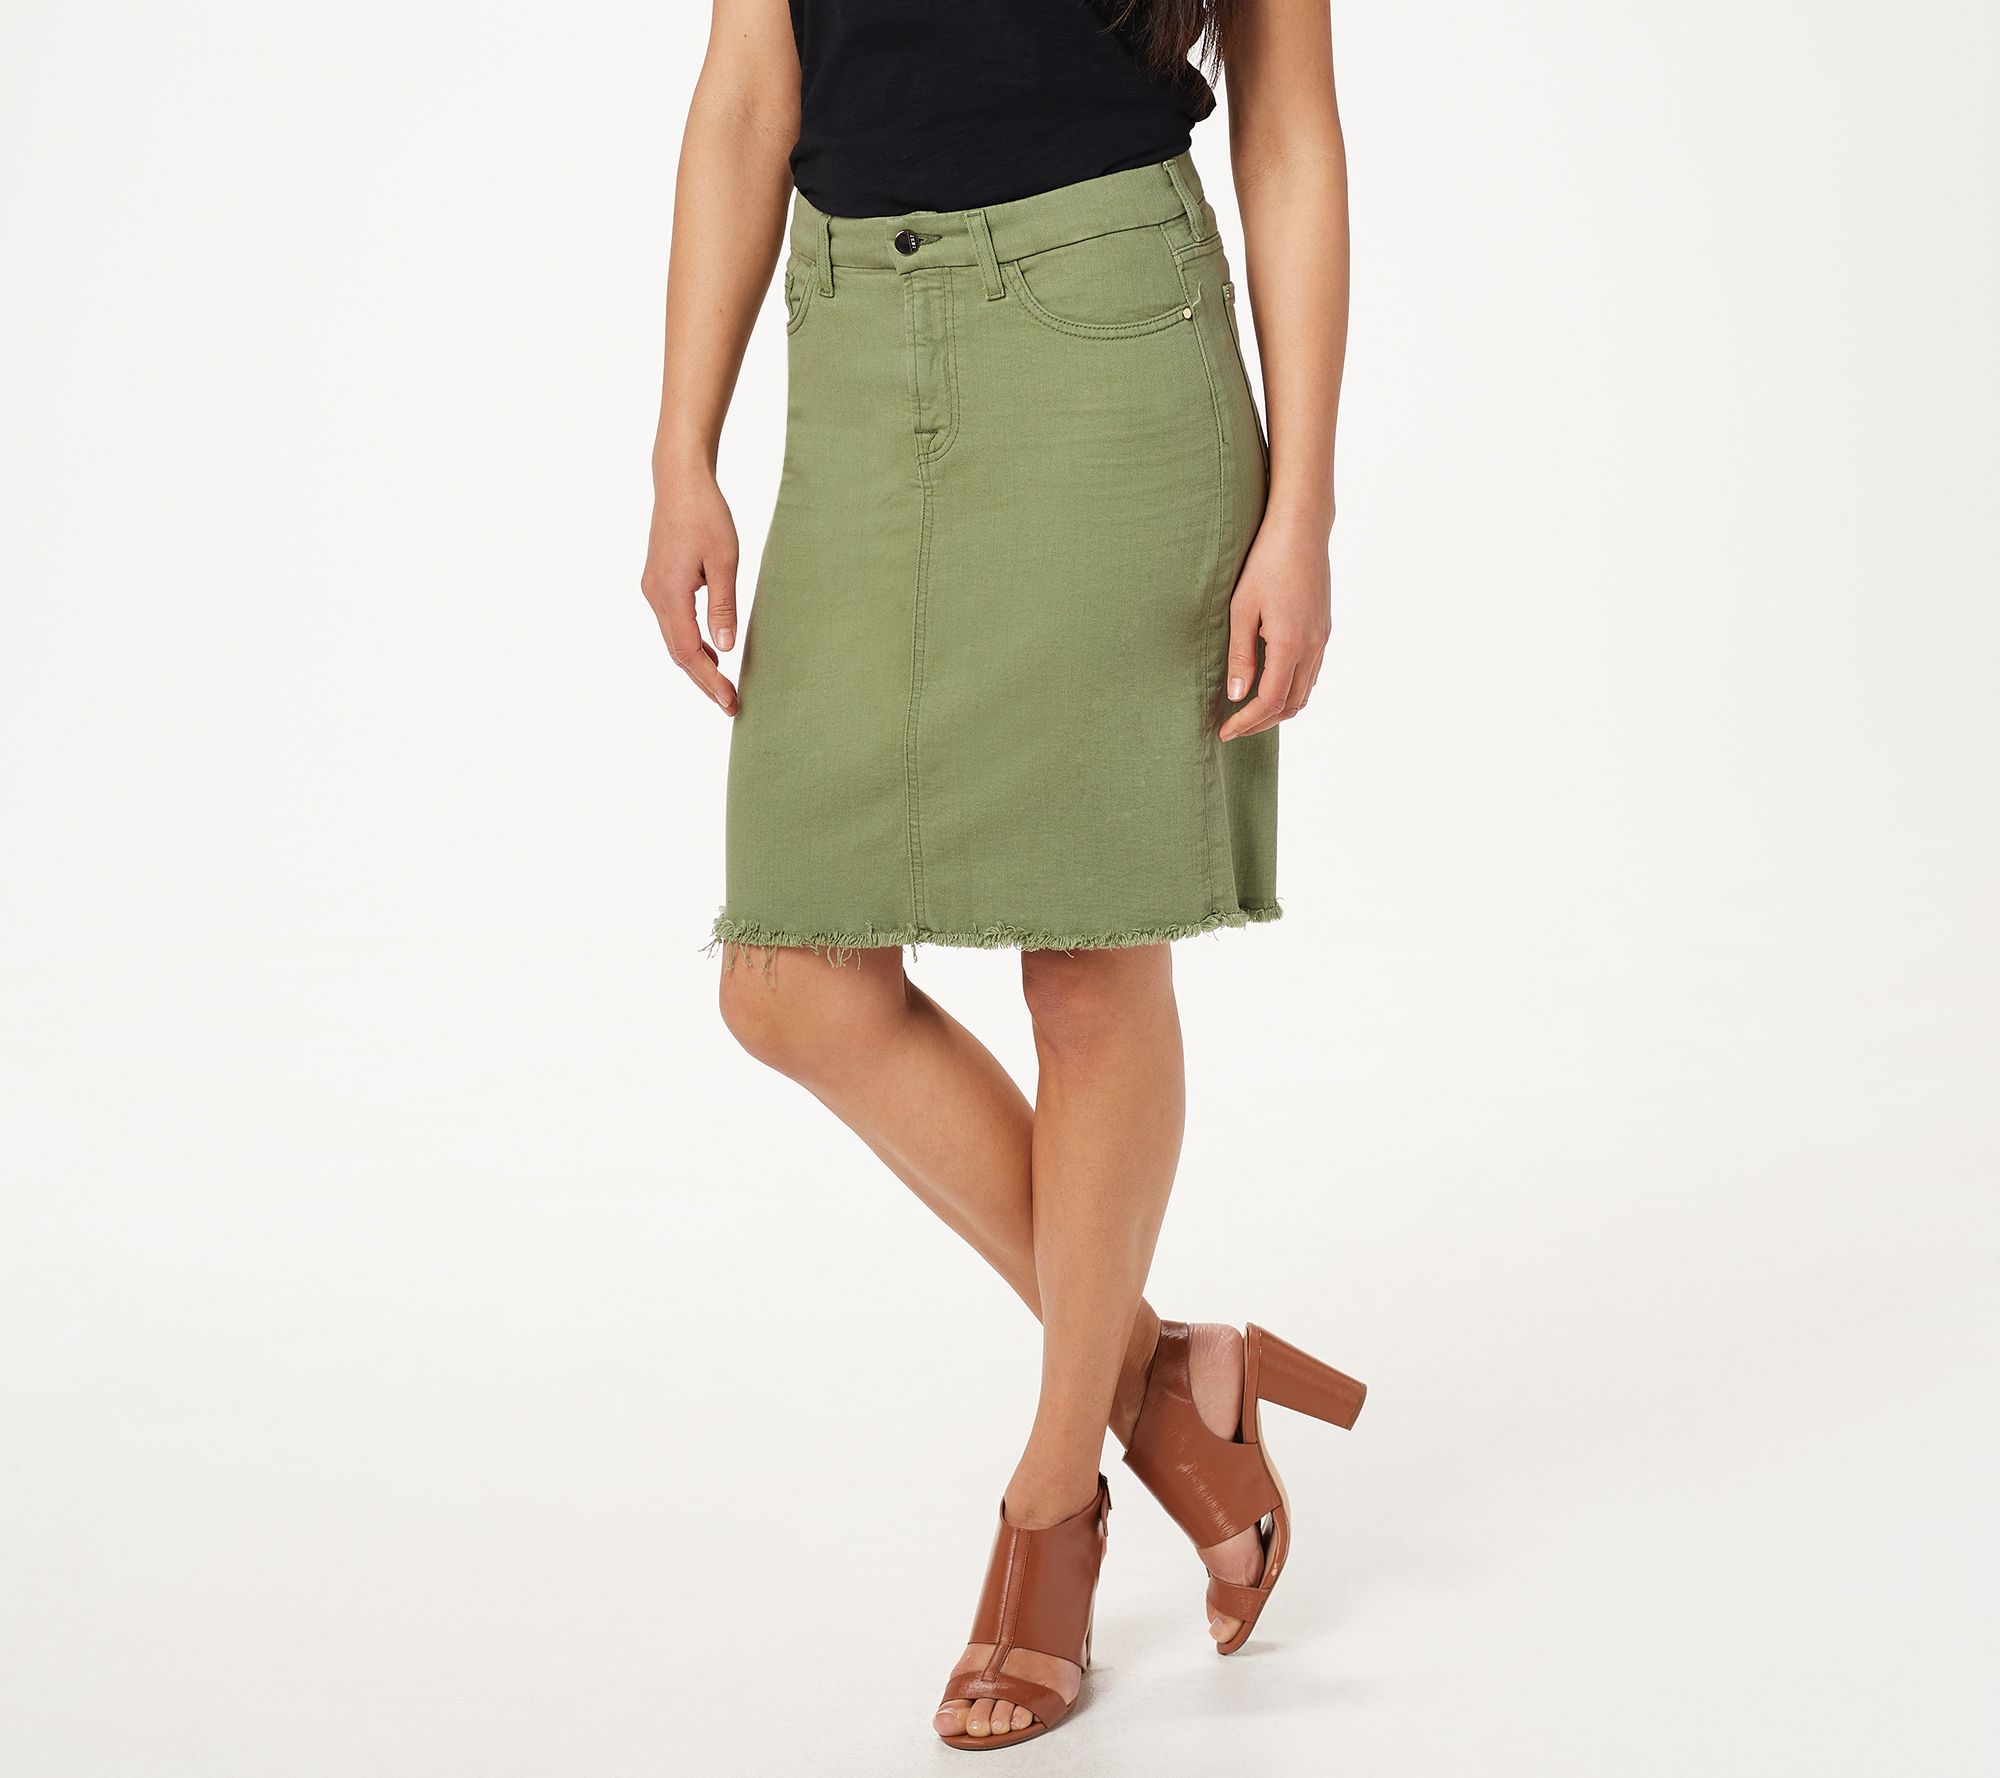 Jen7 by 7 For All Mankind Pencil Skirt - QVC.com